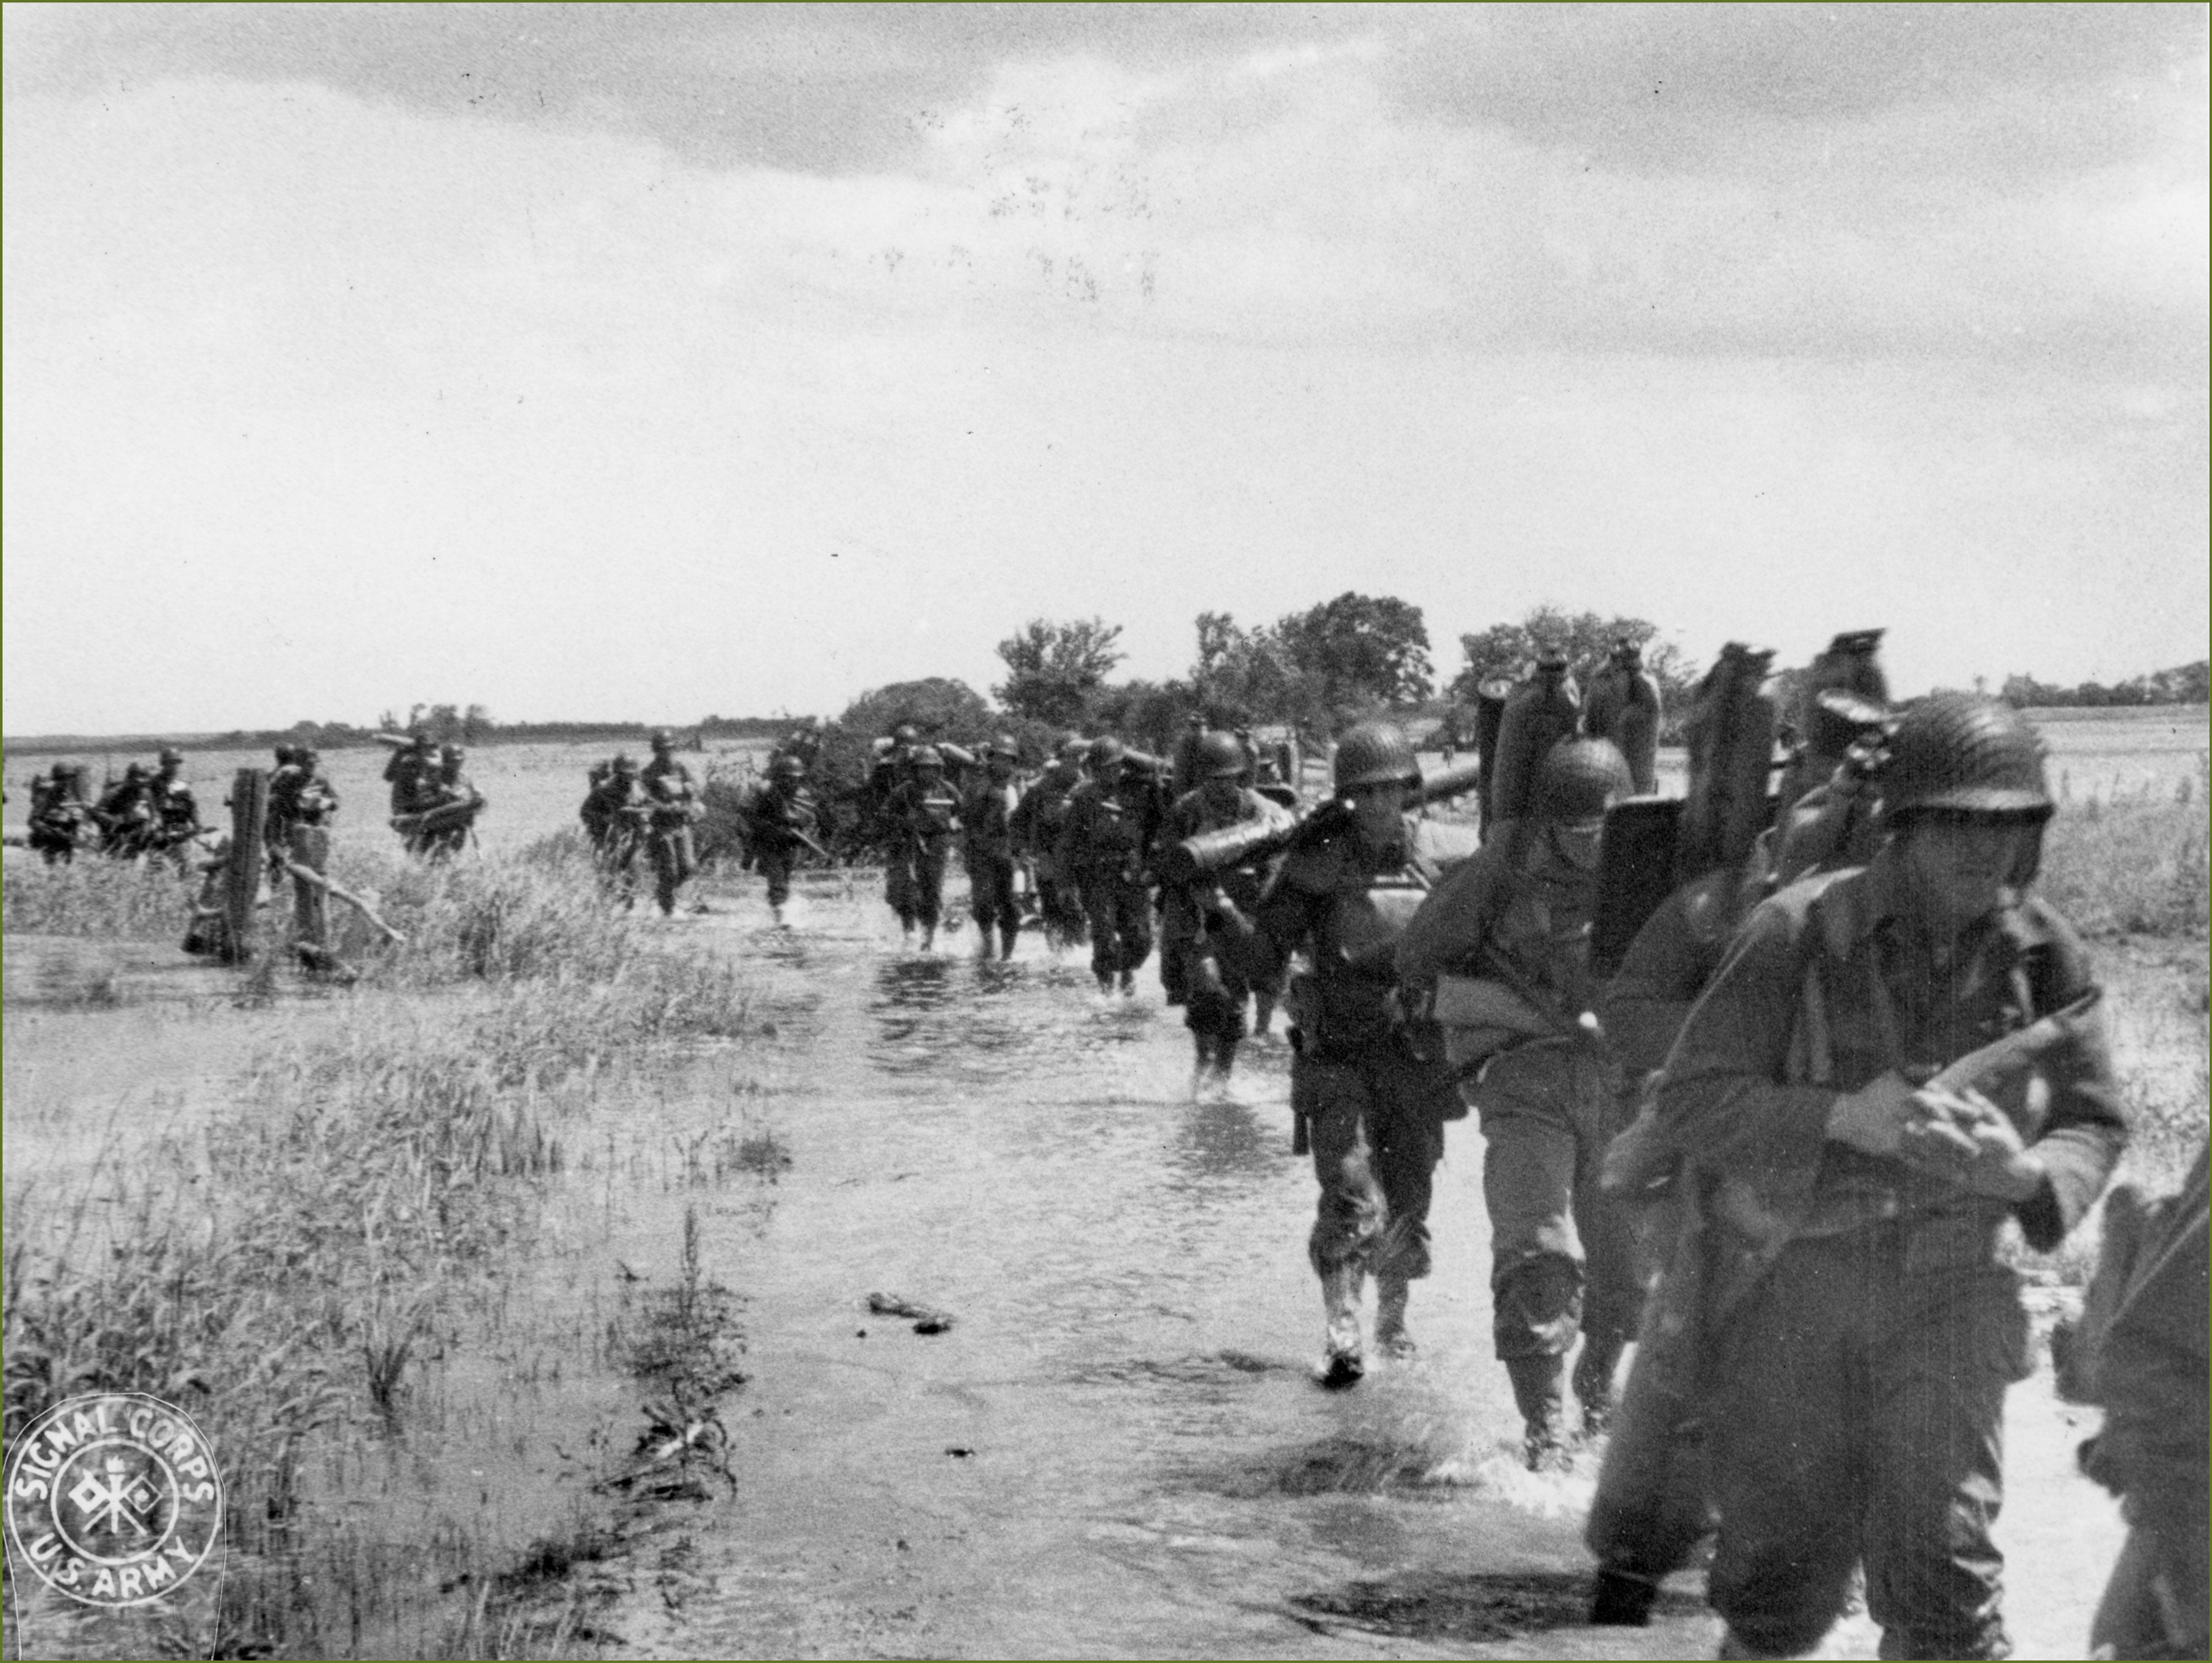 US soldiers disembarking and marching toward the flooded area